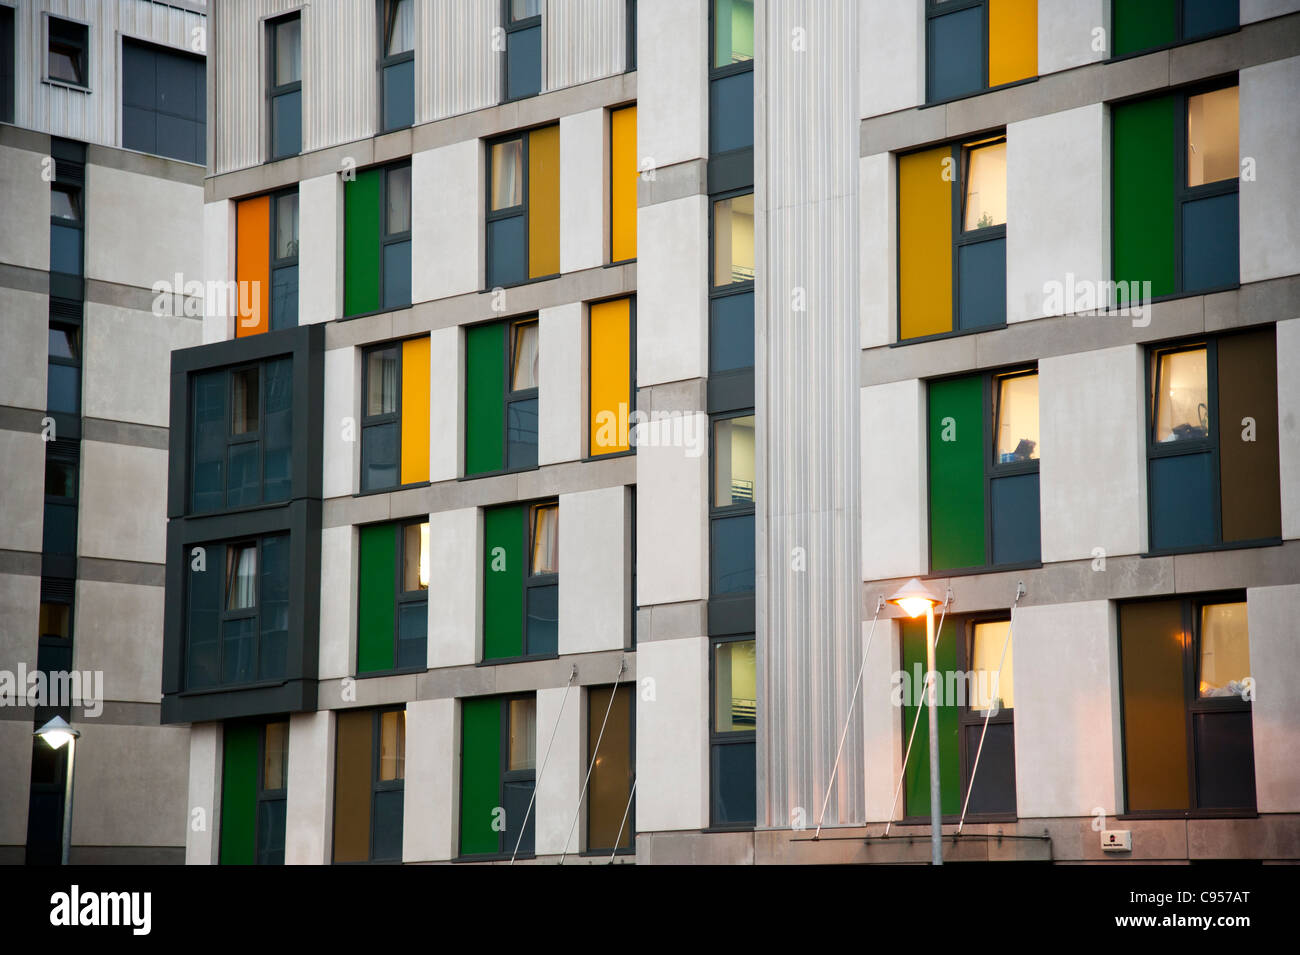 exterior of a modern block of Student accommodation halls of residence, Swansea University campus, Wales UK Stock Photo